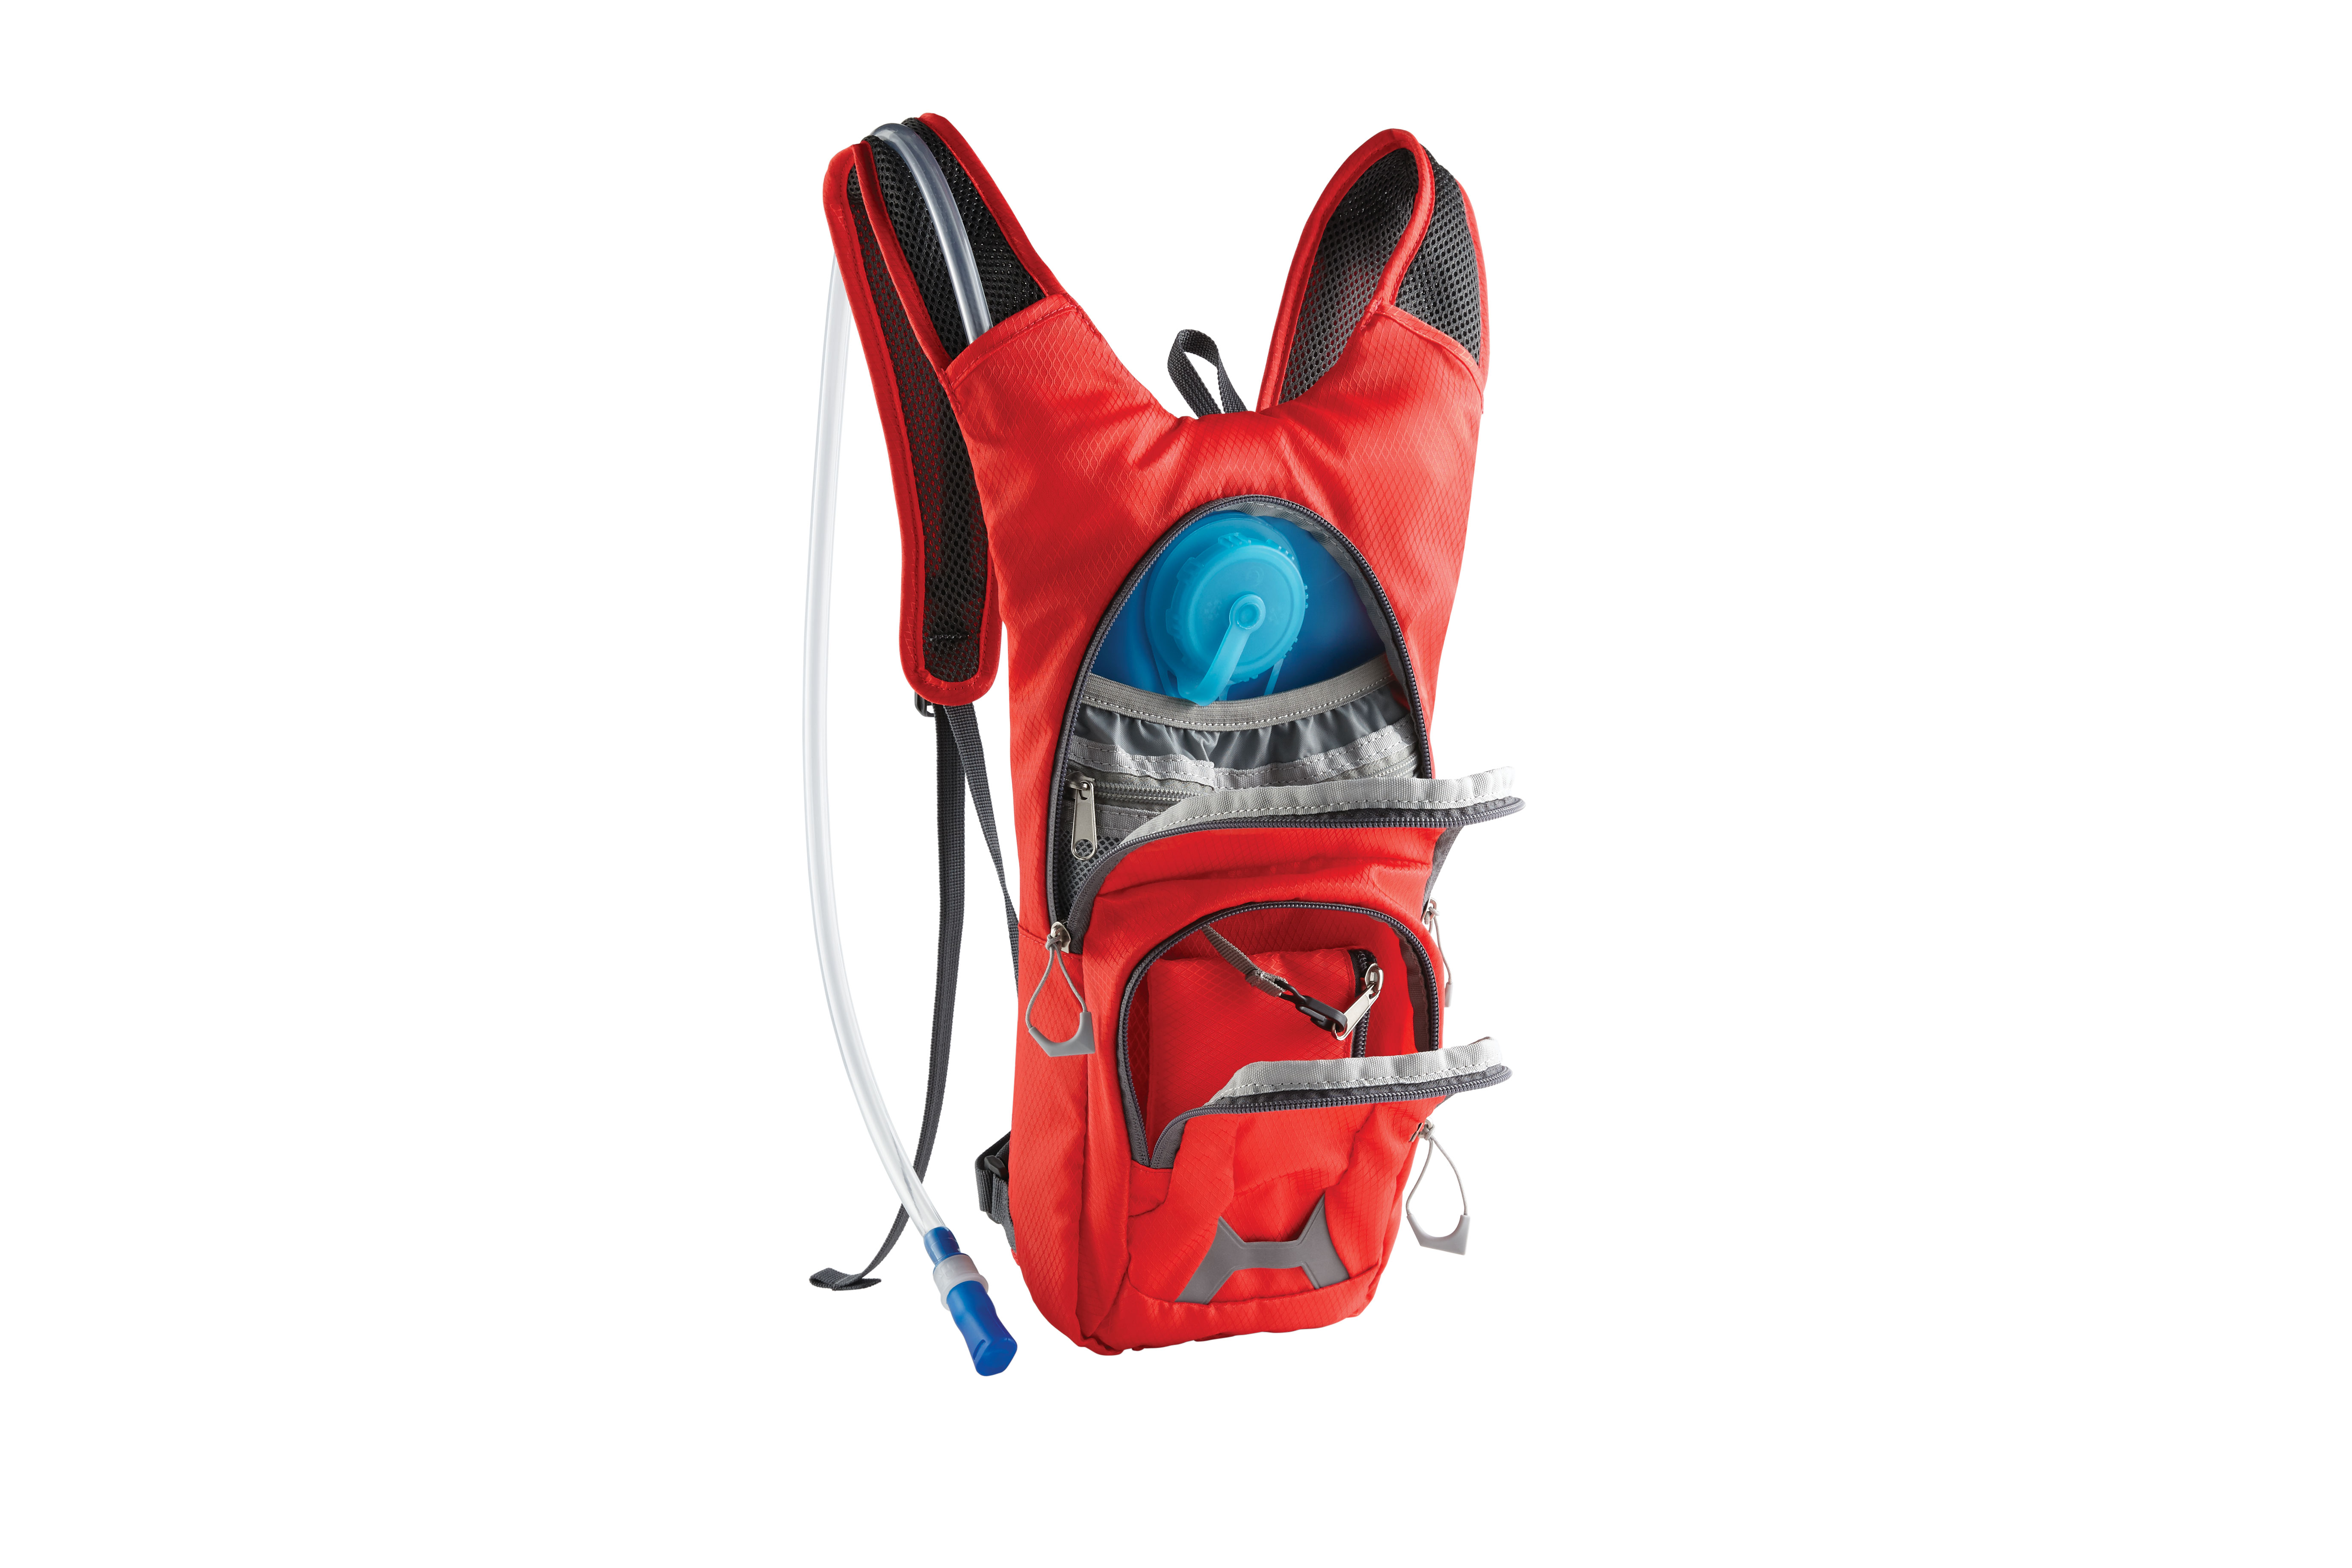 Ozark Trail 5 Ltr Adult Hydration Hiking Backpack, Unisex, Red - image 4 of 5